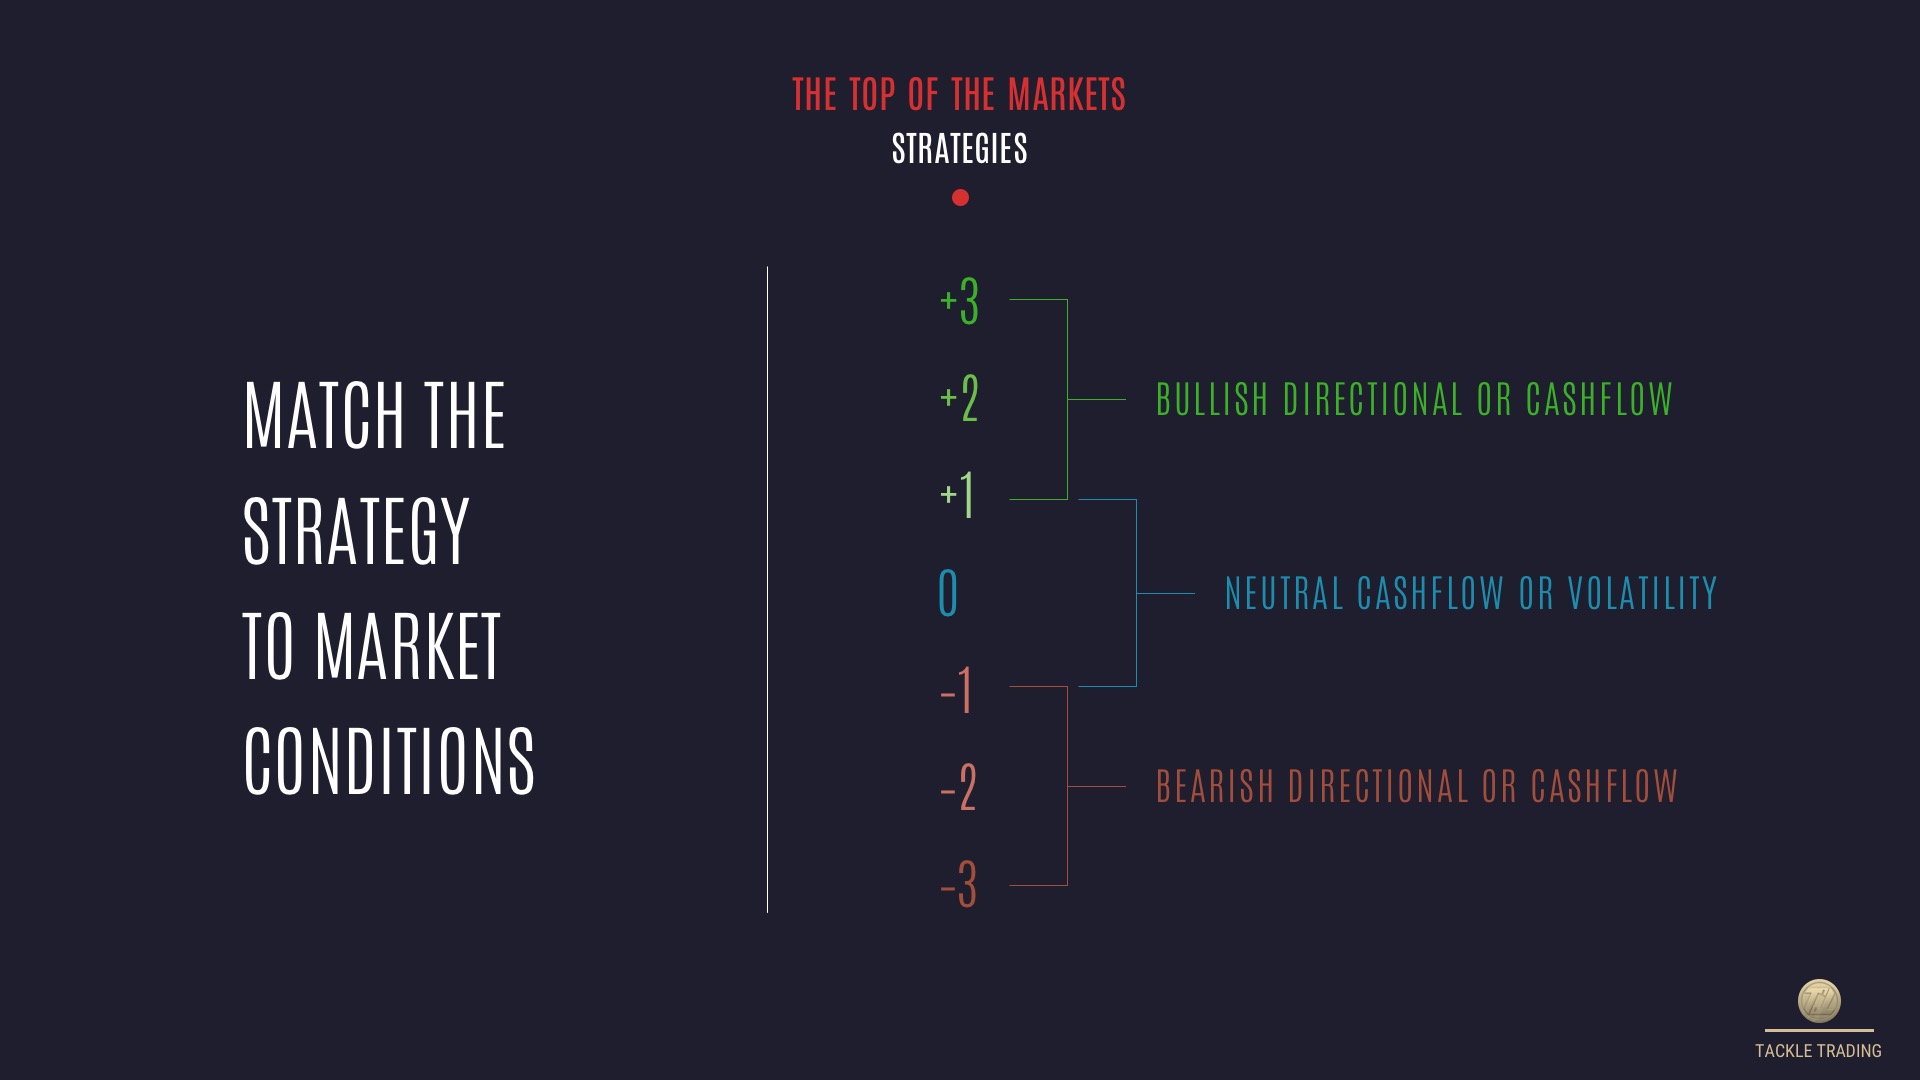 Match the strategy to market conditions.